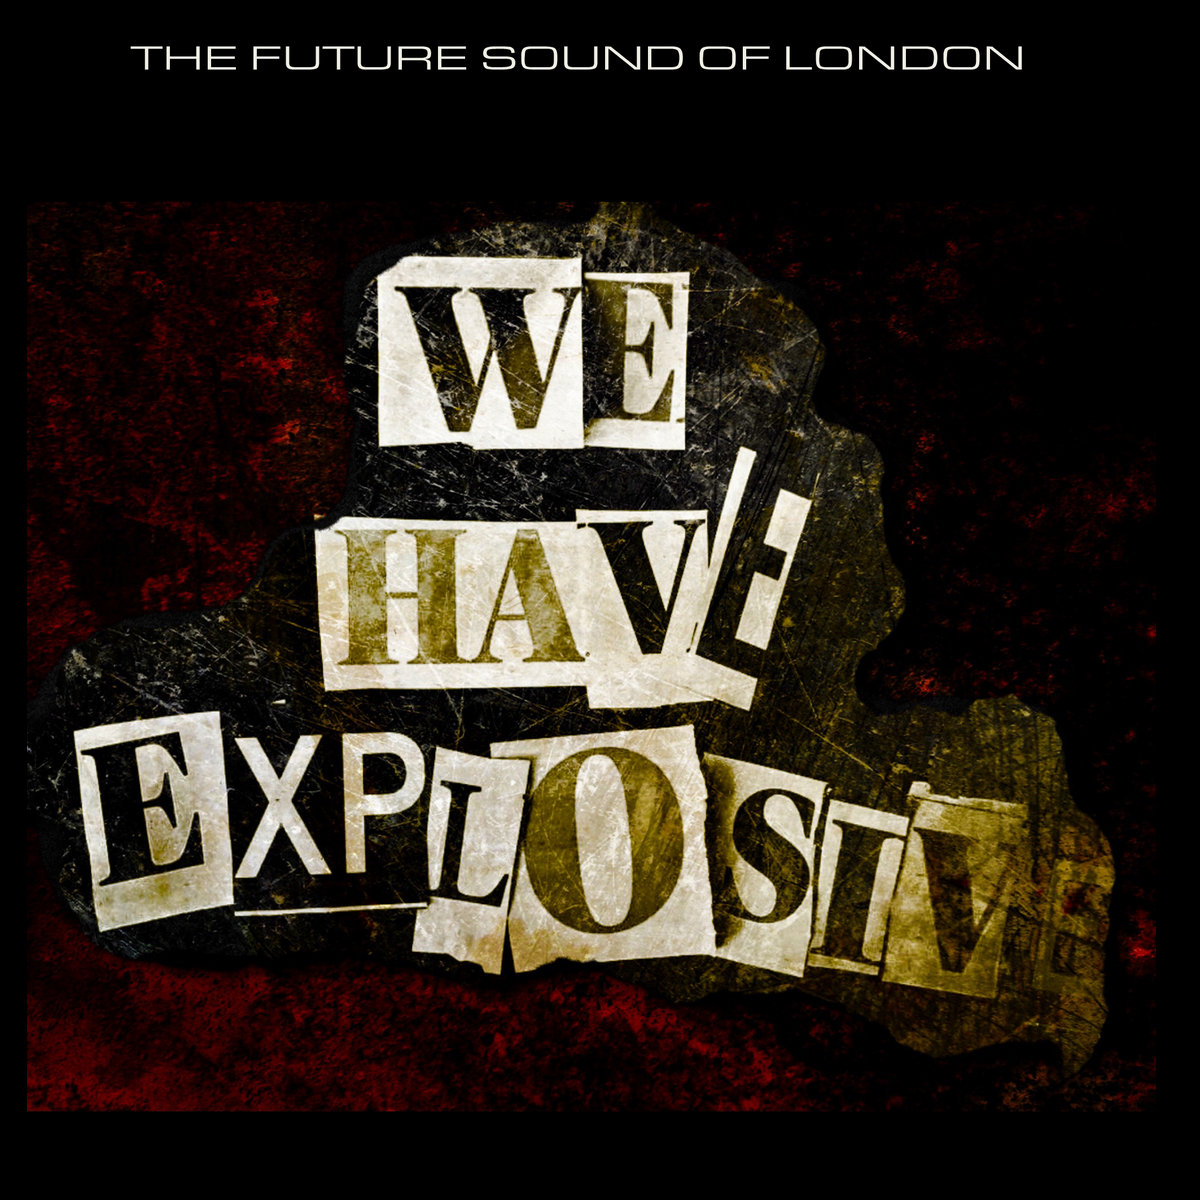 The Future Sound of London – We Have Explosive 2021